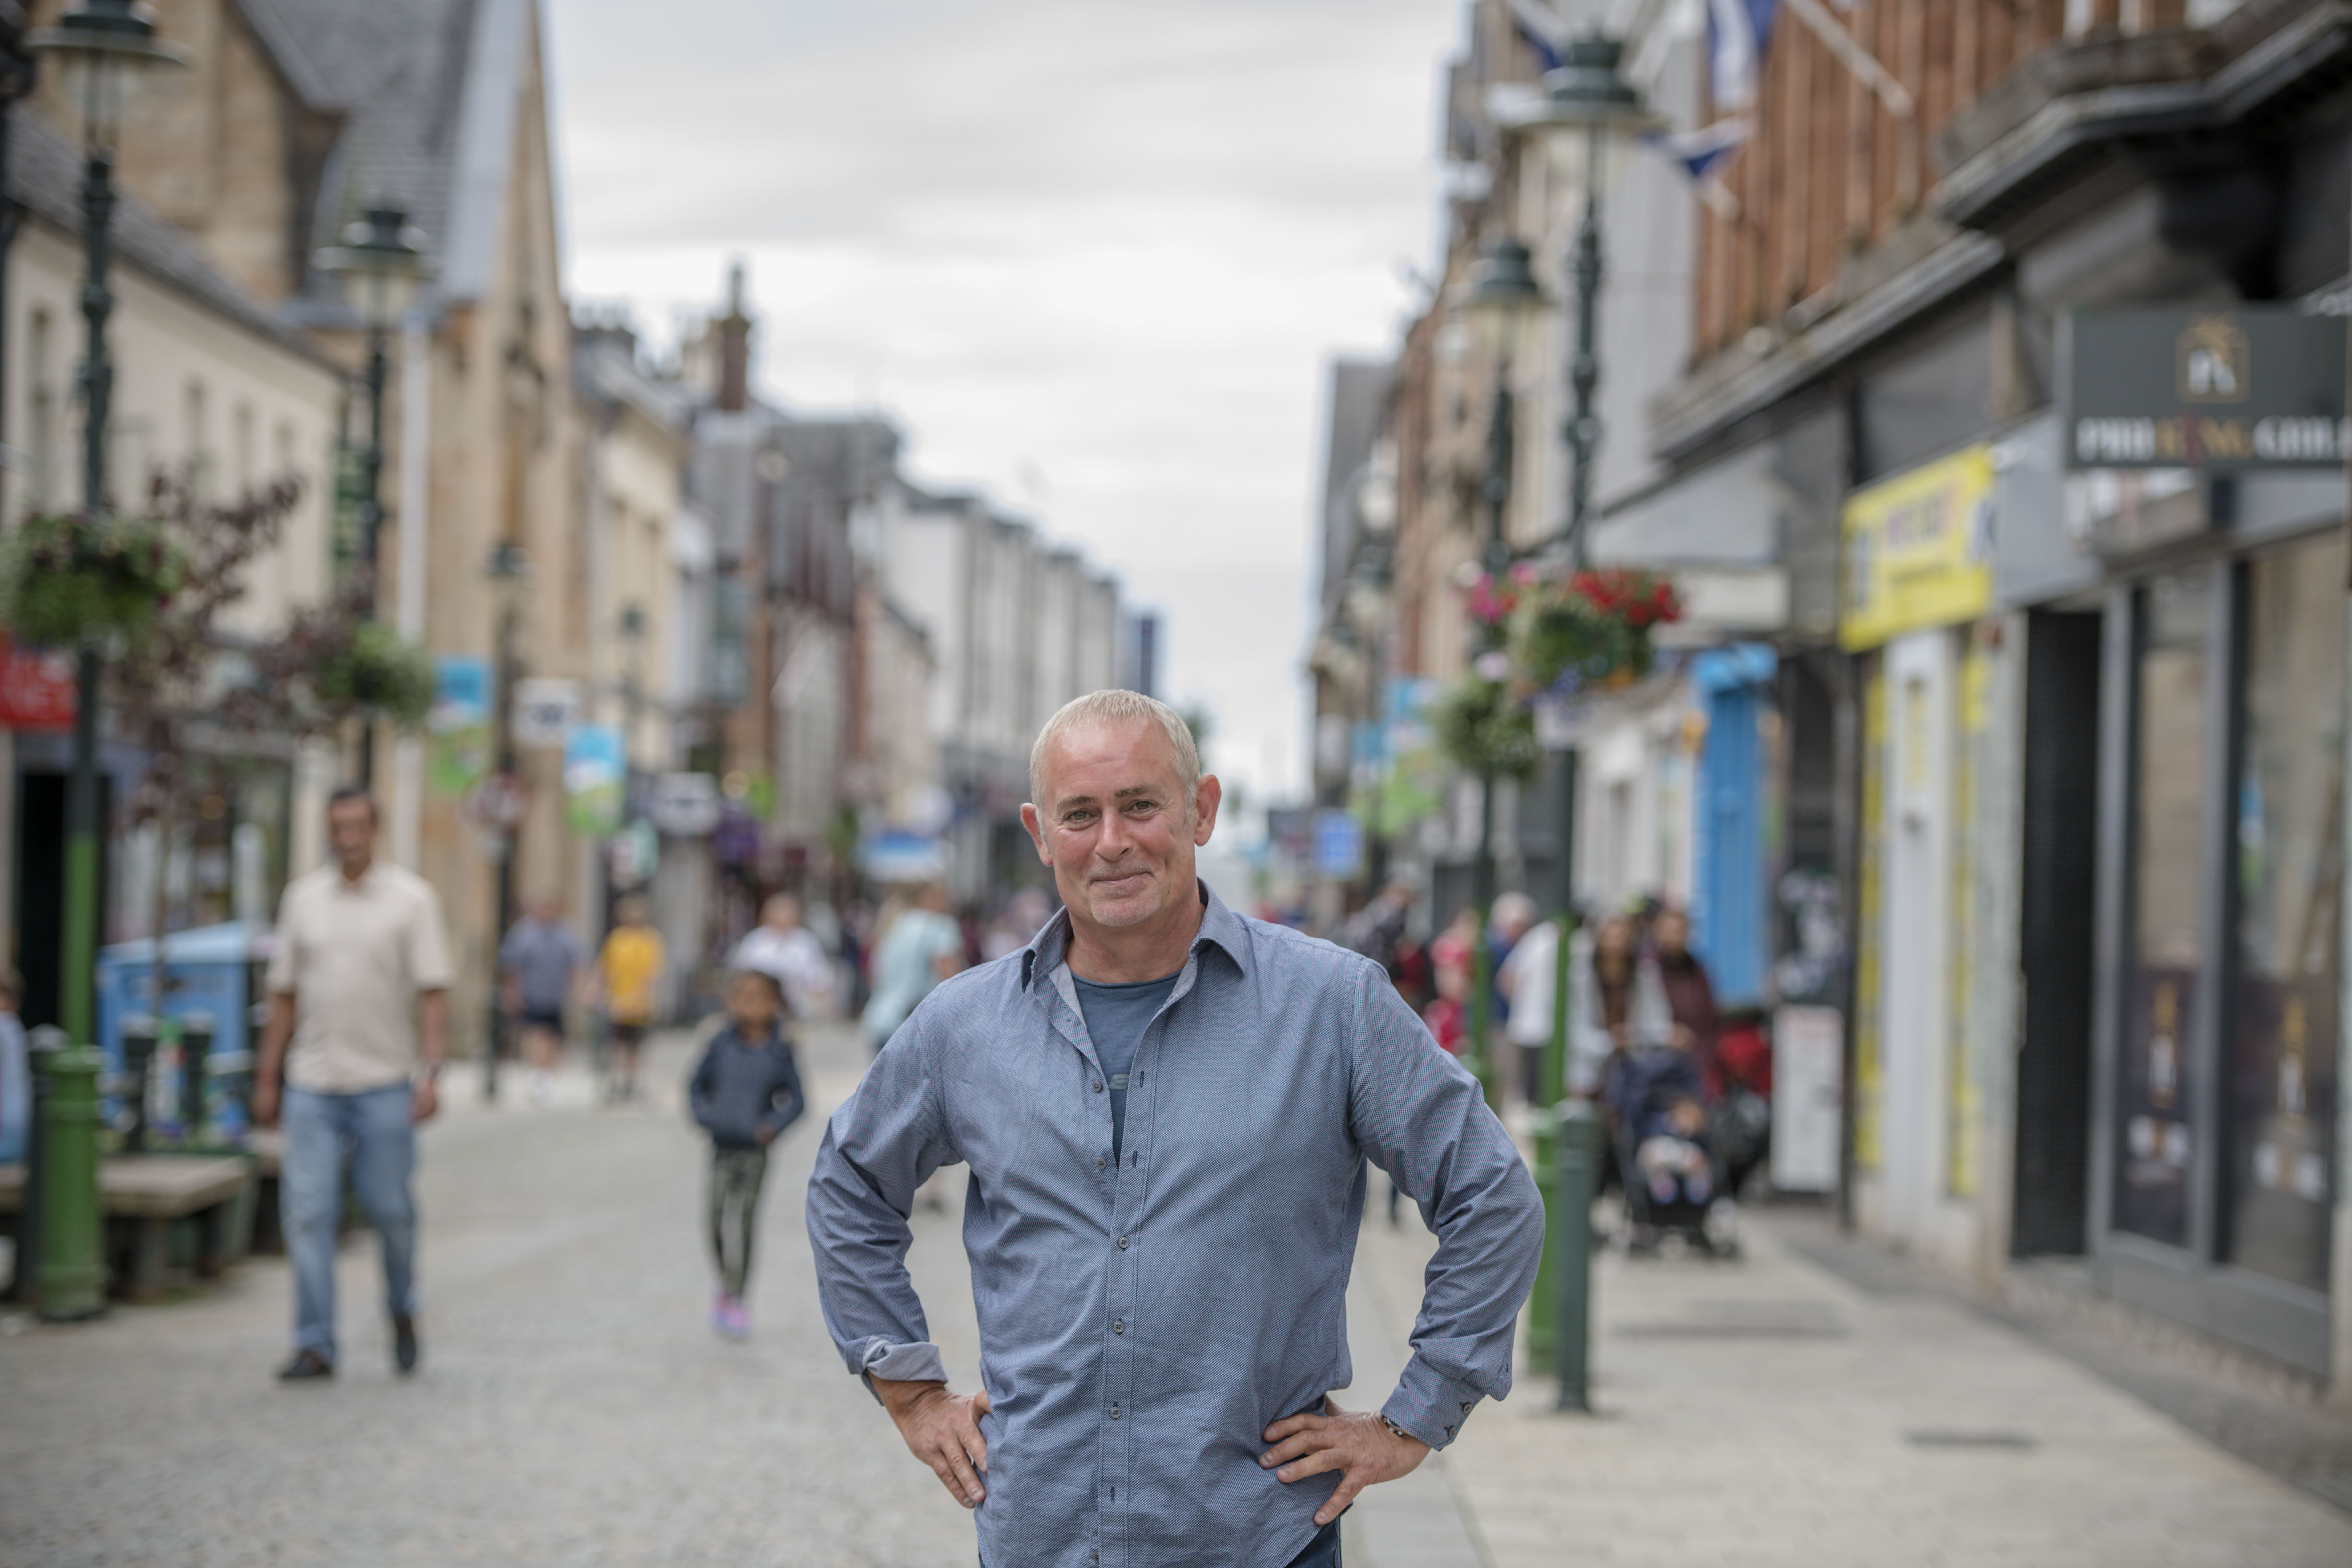 Toolkit for transforming Scotland’s towns unveiled